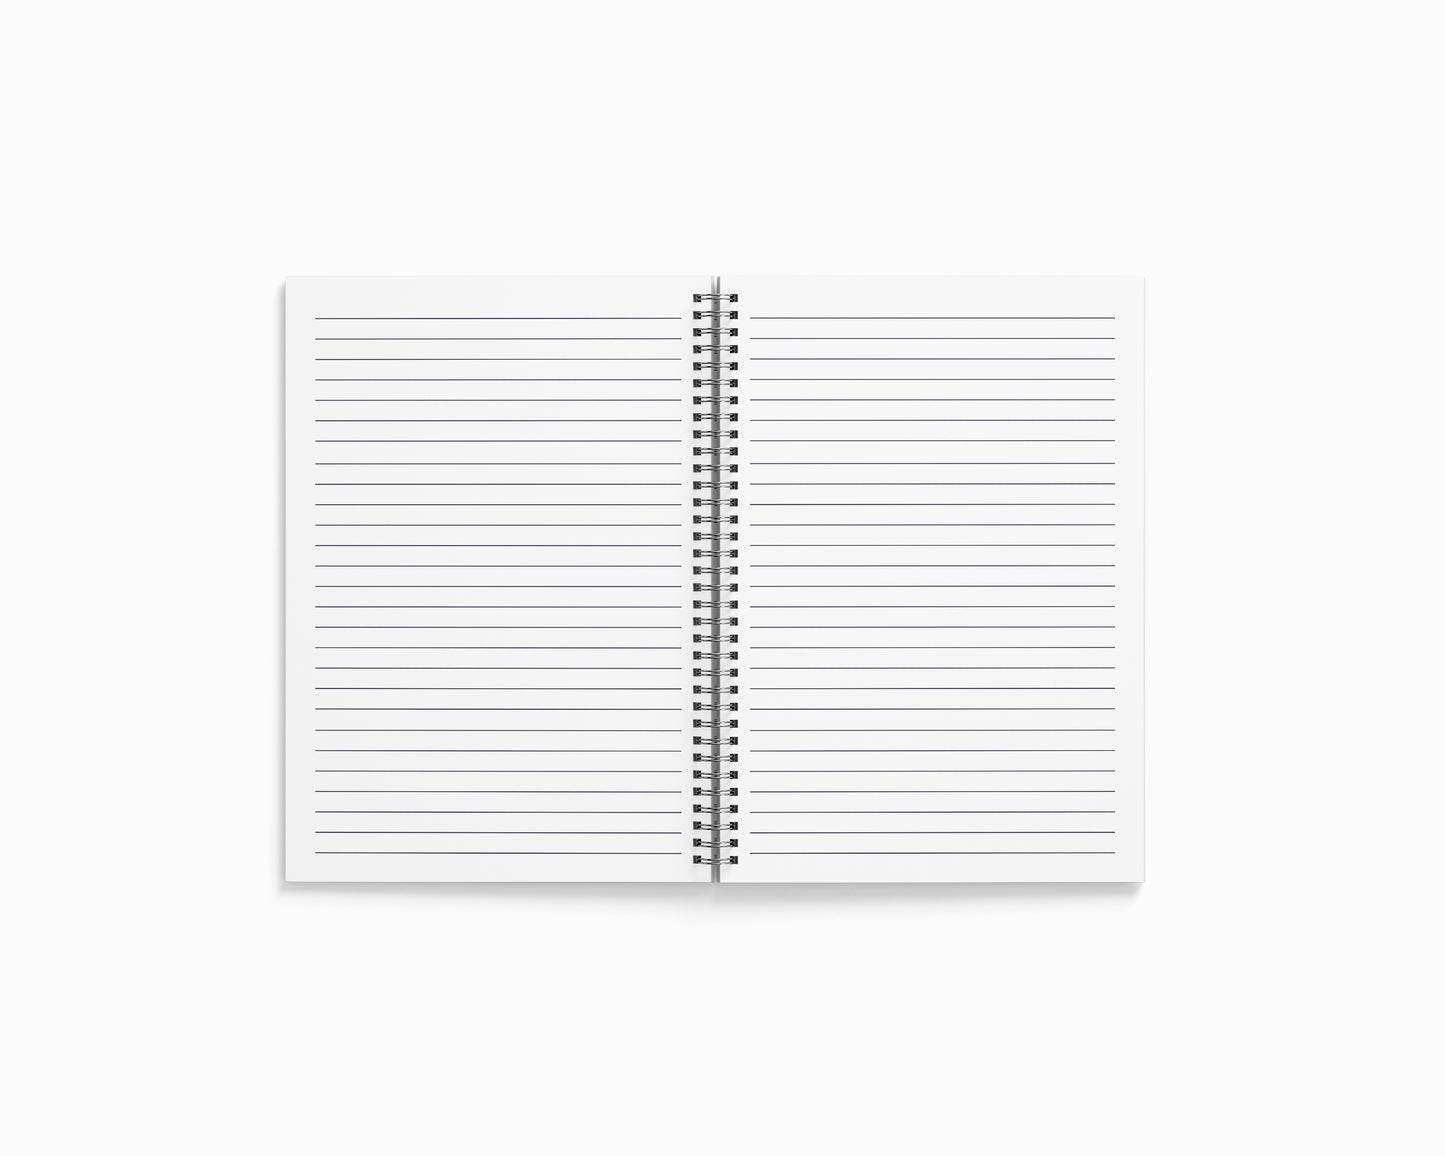 50 Number Notebook (Red, A5 Size, 100 Pages, Ruled, 4 Pack)